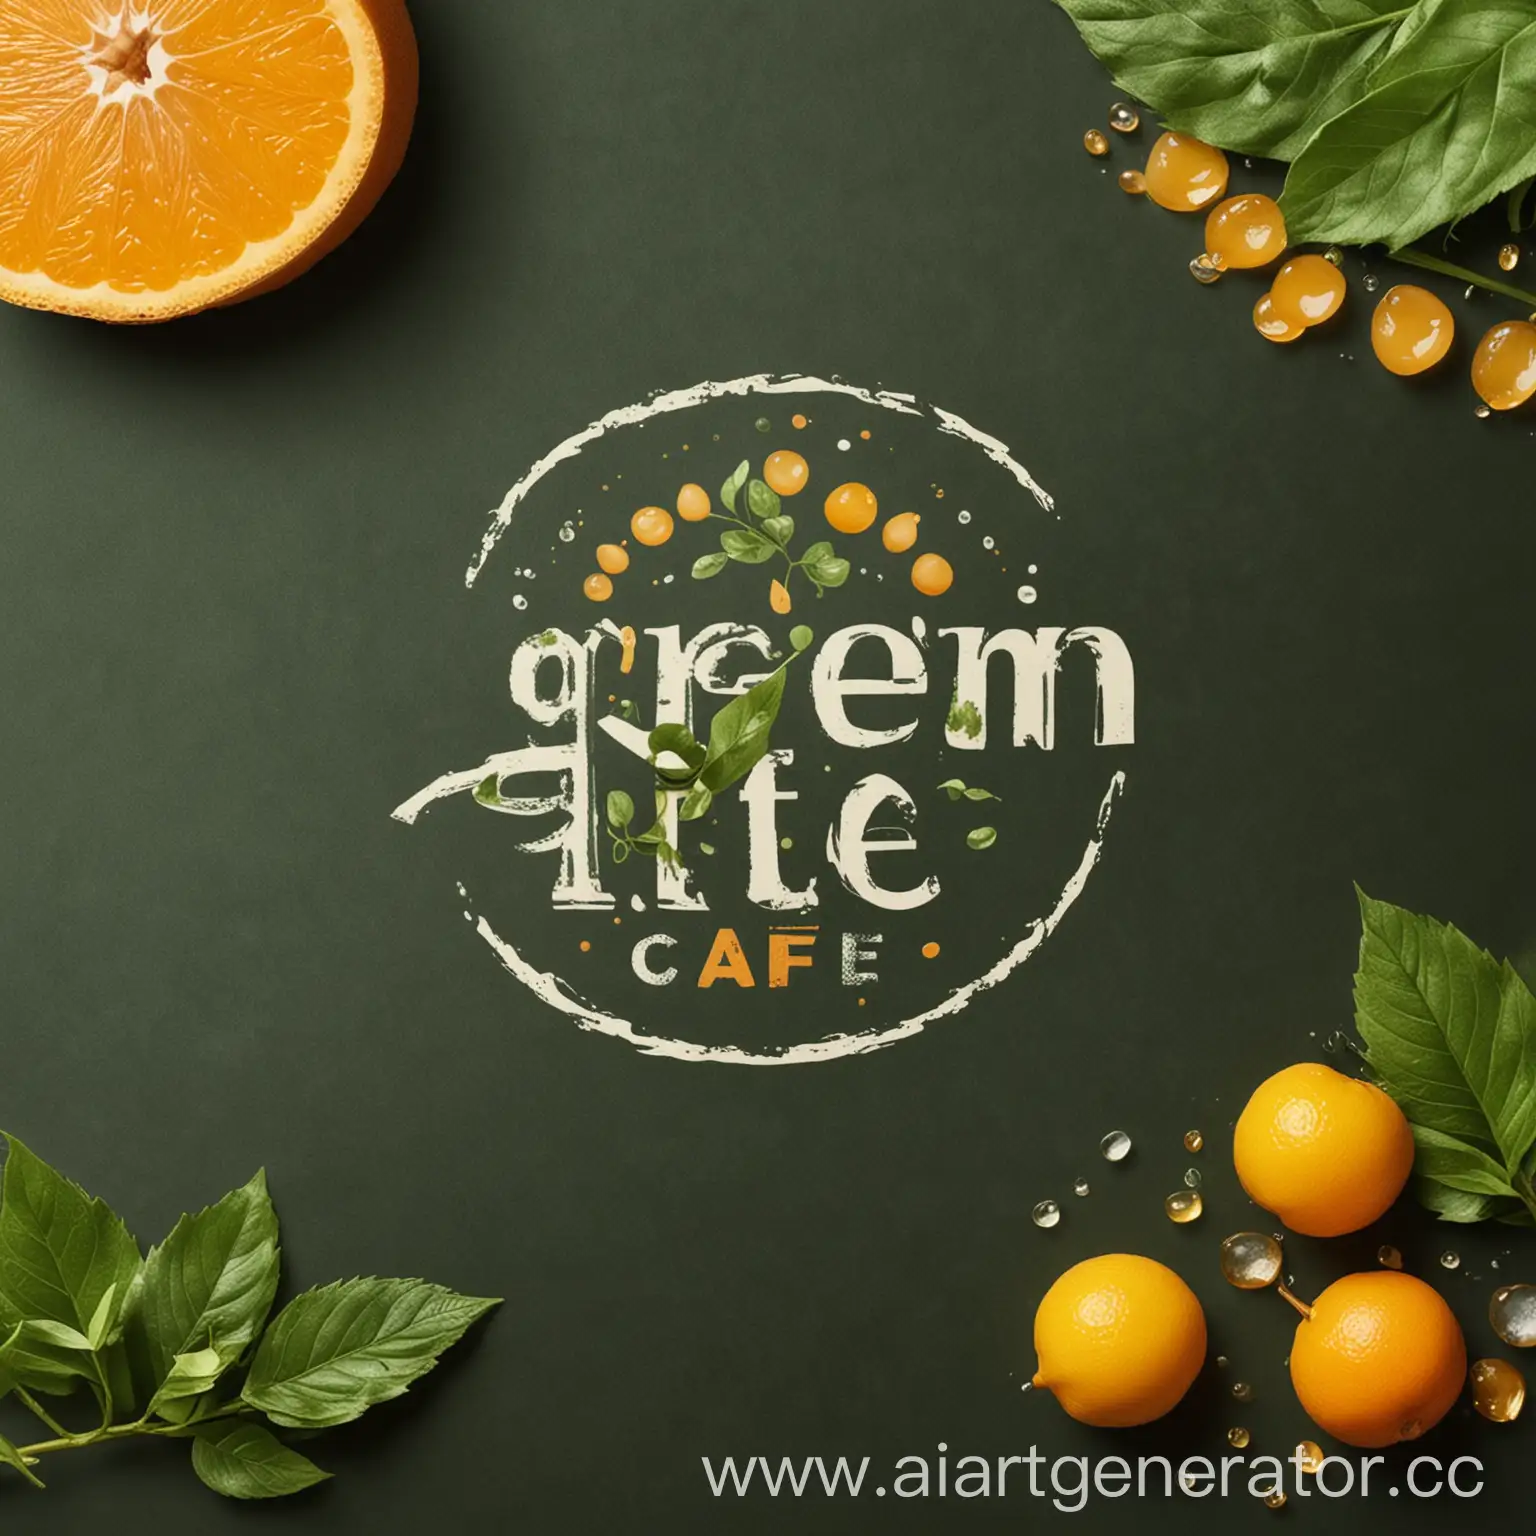 To develop an original, concise and elegant logo for the Green Bite cafe. The design should reflect the idea of a healthy diet. It is recommended to use the following colors: green, yellow and orange. Elements such as leaves, fruits, and juice drops can be